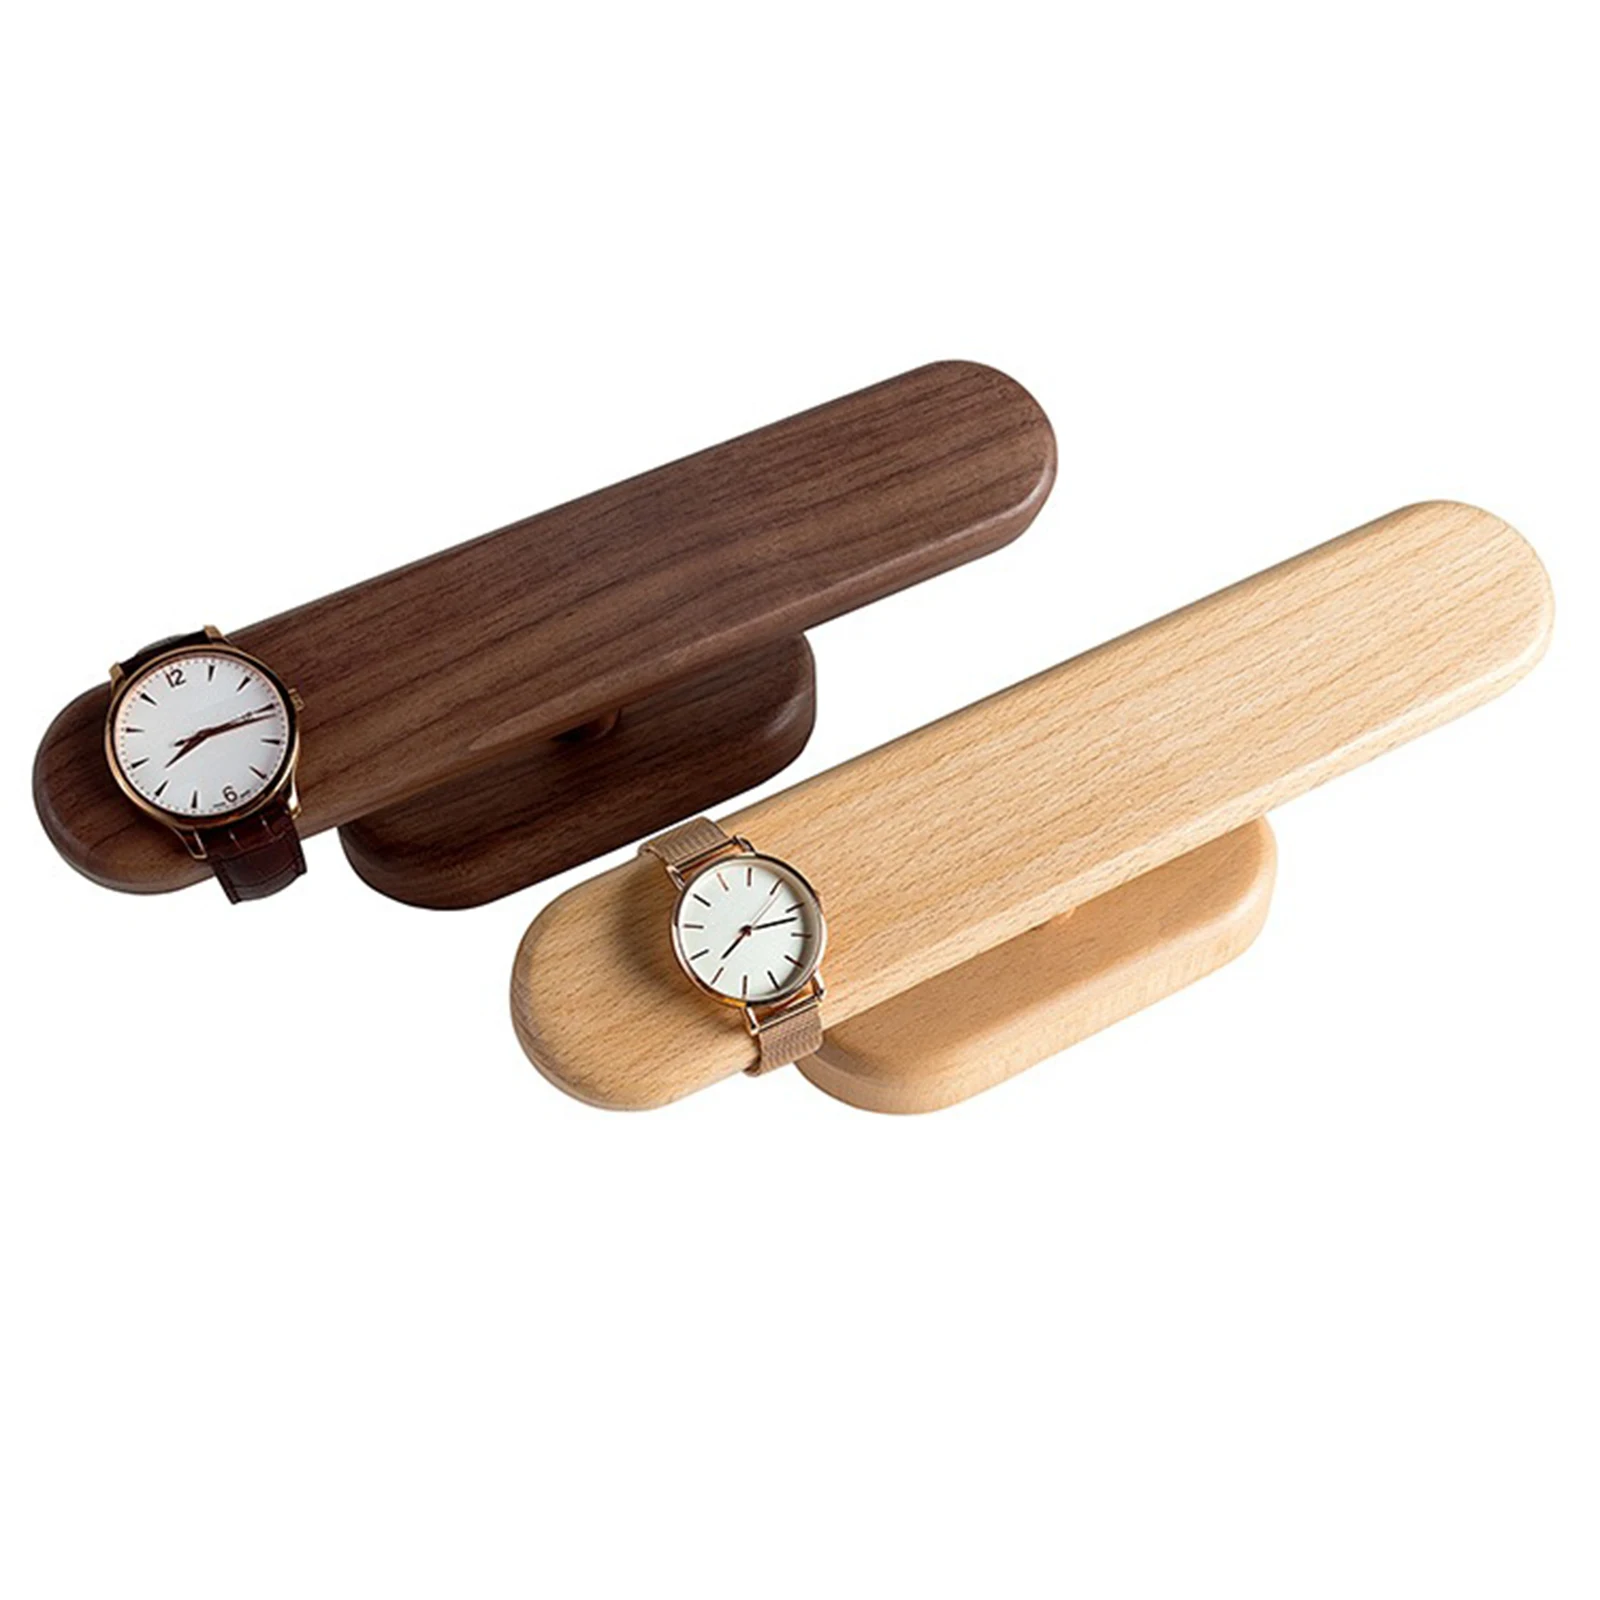 Wooden Jewelry Display Perfect for Bracelet Bangle Watch Home Organization